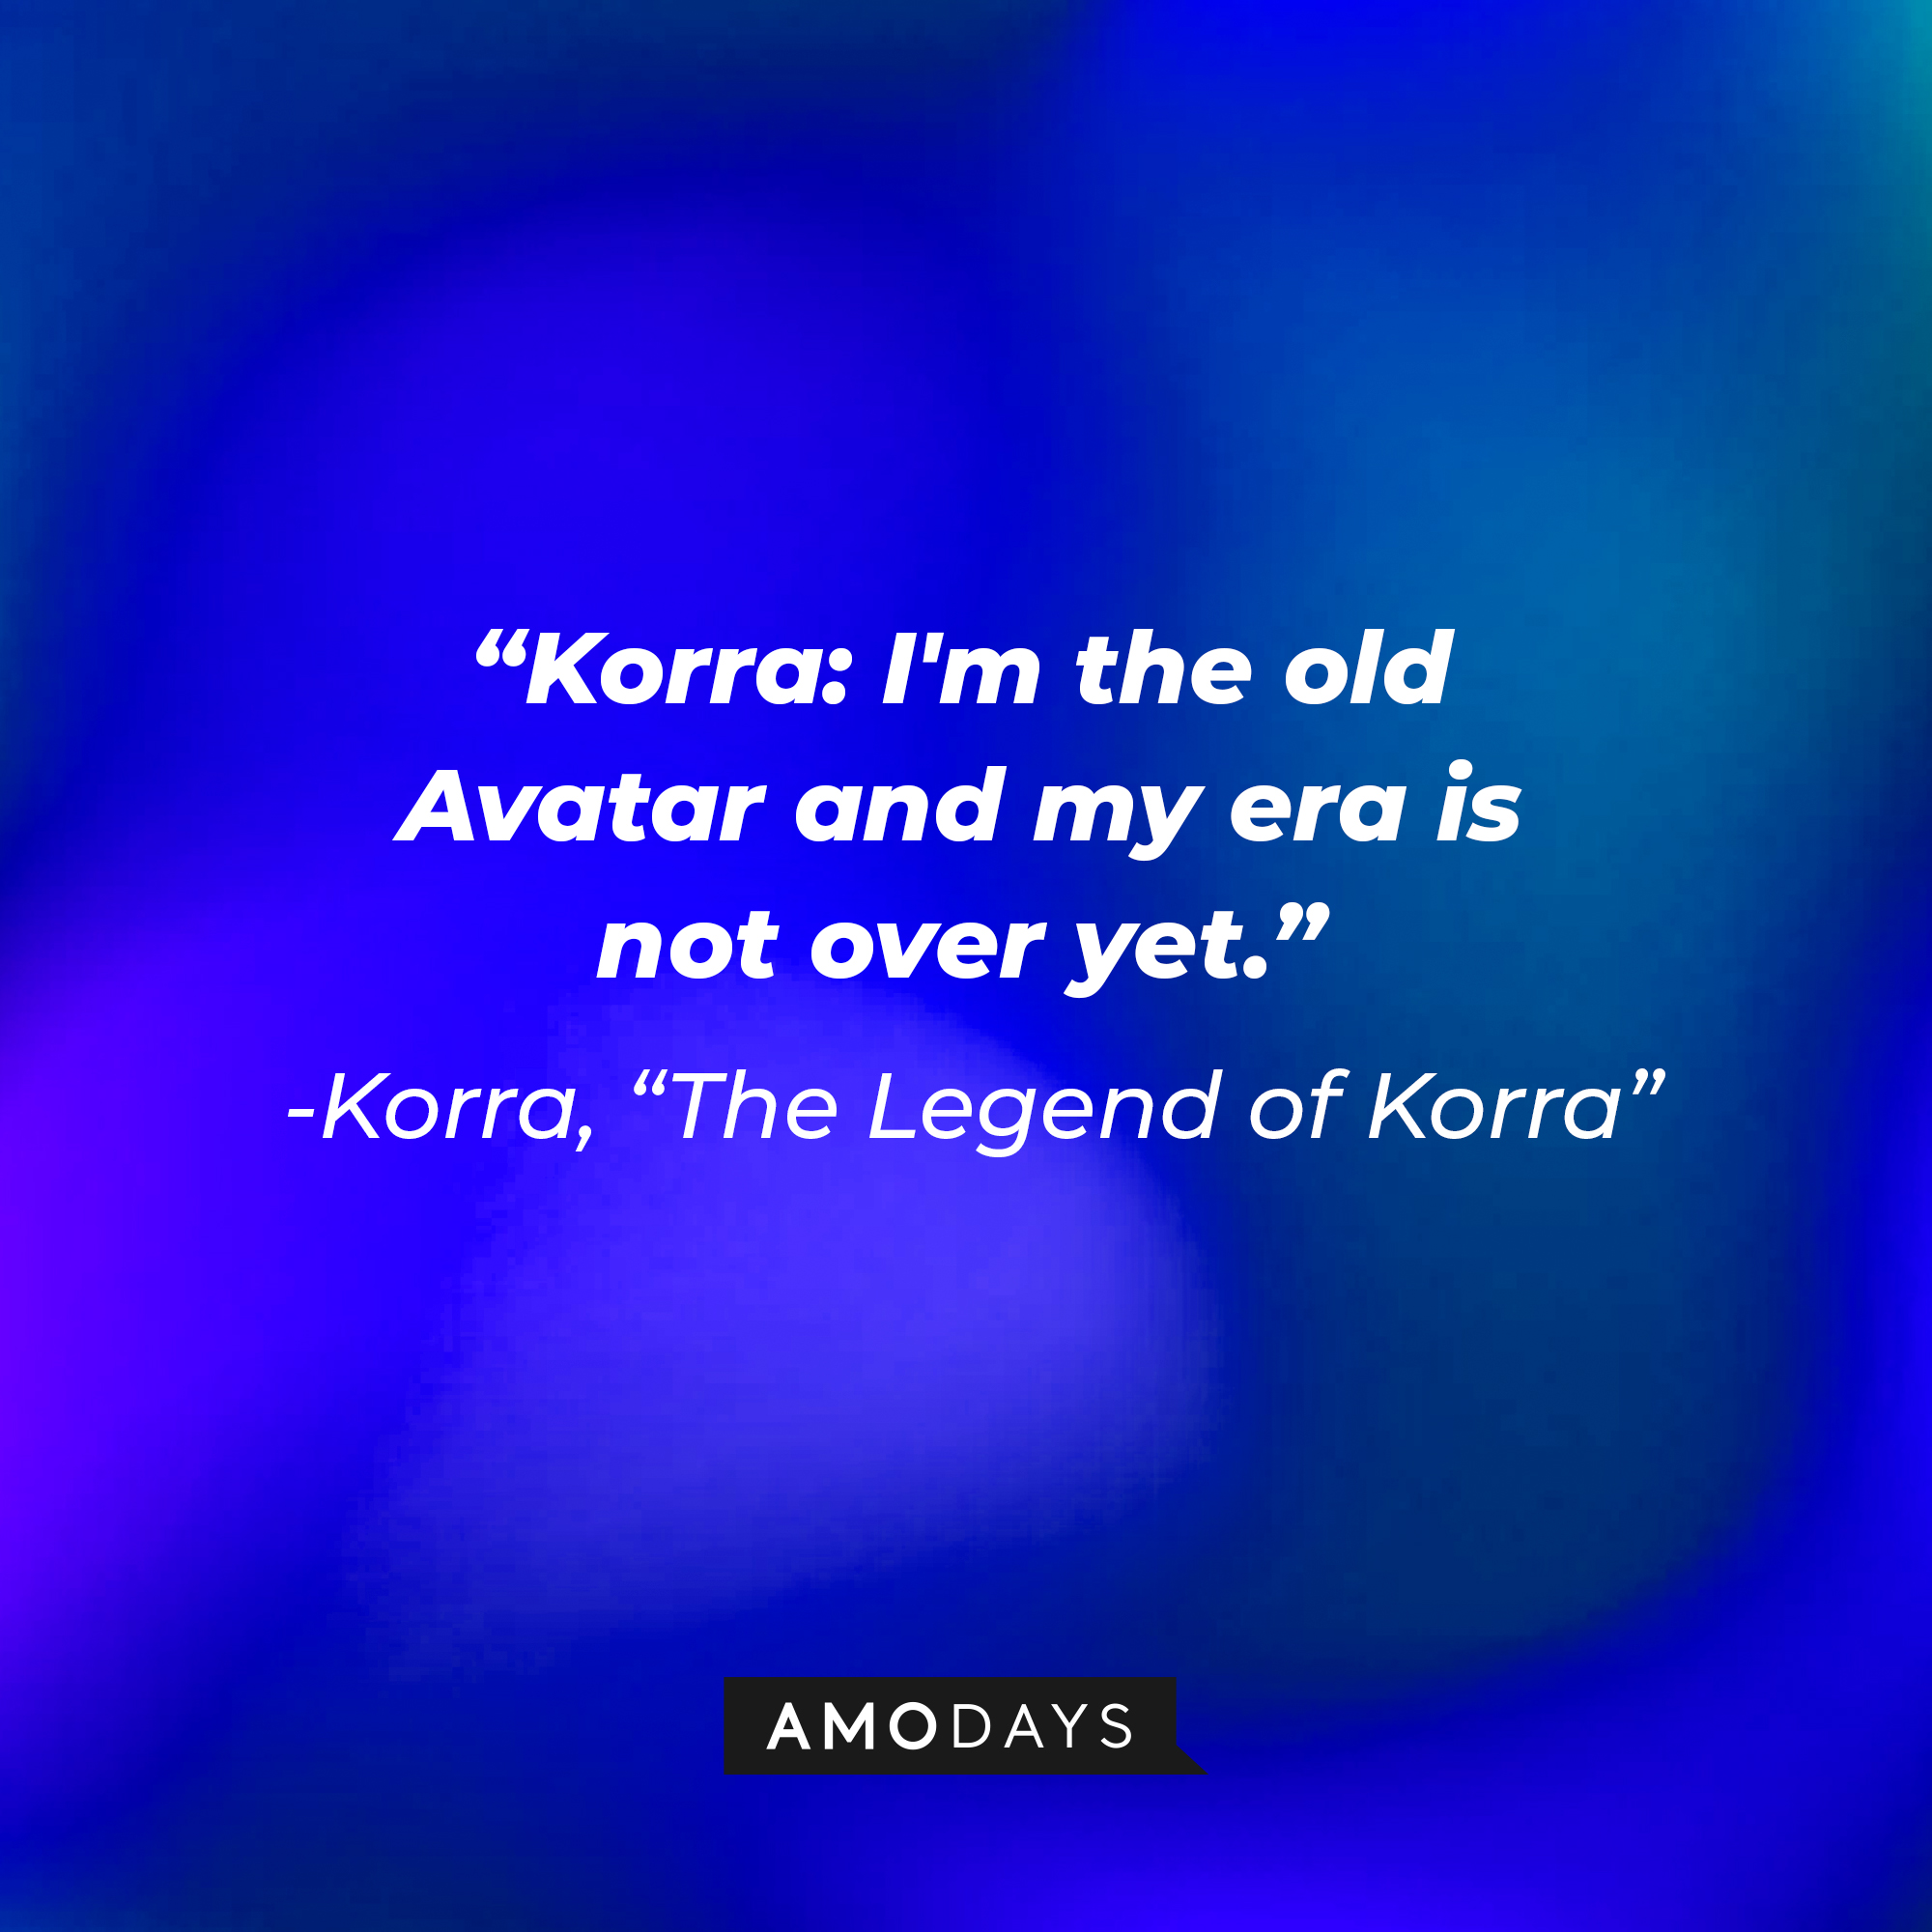 Korra’s quote in “Avatar: The Legend of Korra:” "I'm the old Avatar and my era is not over yet." | Source: Amodays